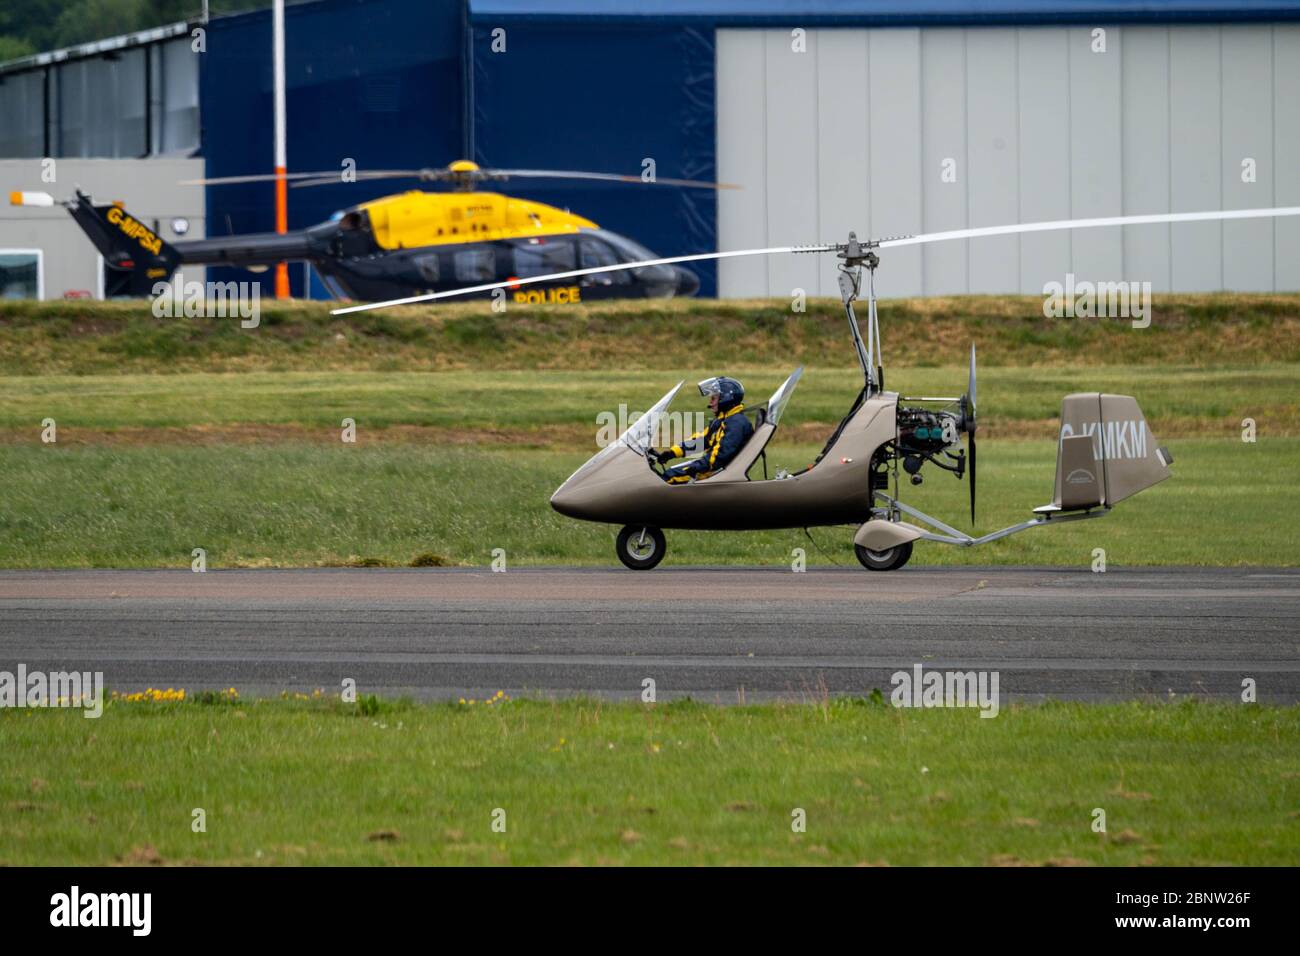 North Weald Essex, UK. 16th May, 2020. General Aviation (Private and recreational flights) resume in England, North Weald Airfield reopens after the lockdown for civil and private flying subject to strict social distancing guidelines RotorSport UK MTOsport Credit: Ian Davidson/Alamy Live News Stock Photo